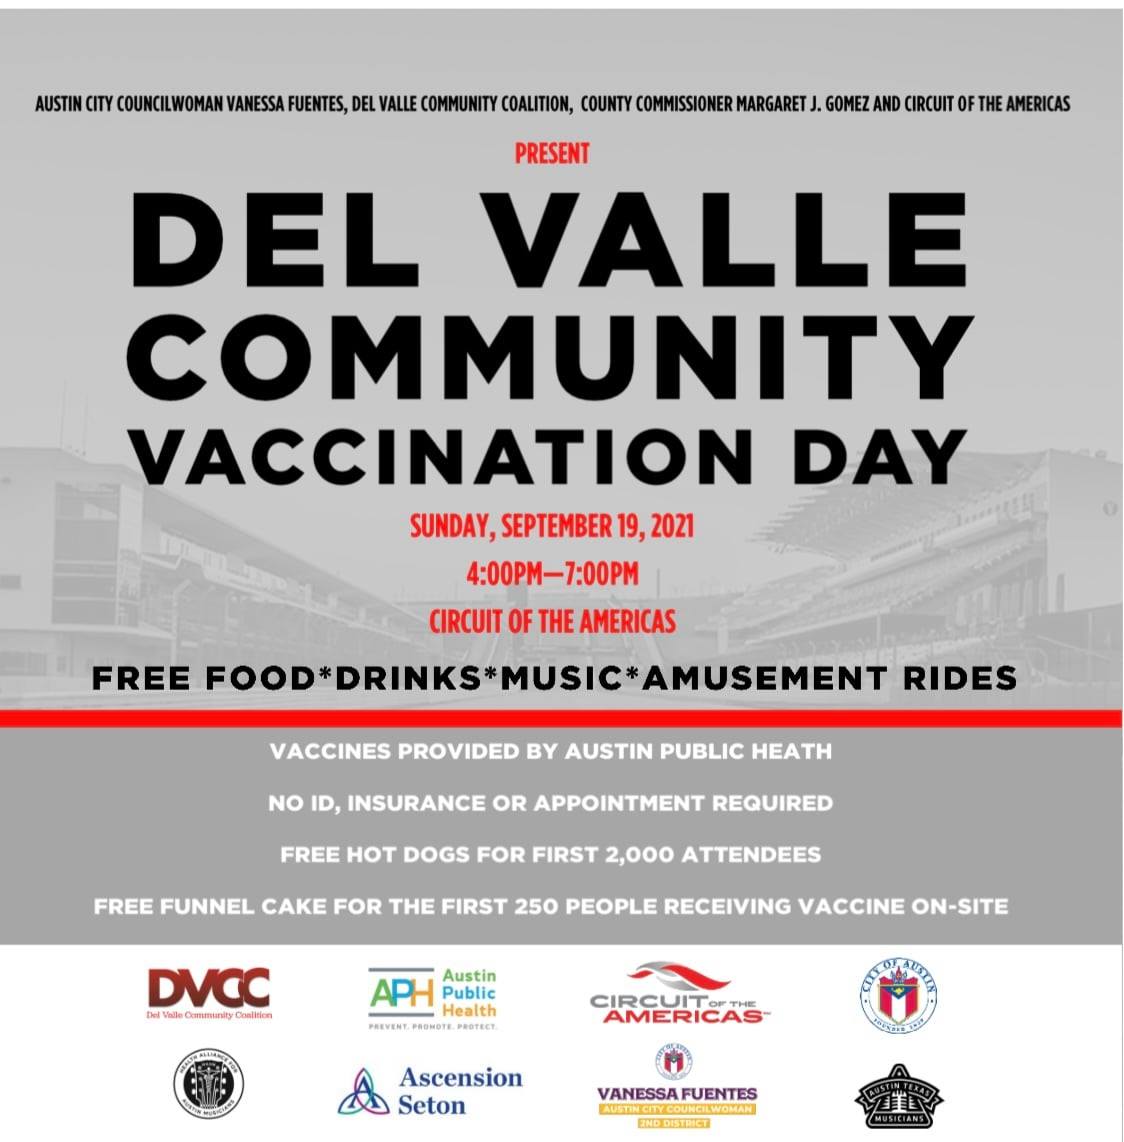 Del Valle Community Vaccination Day